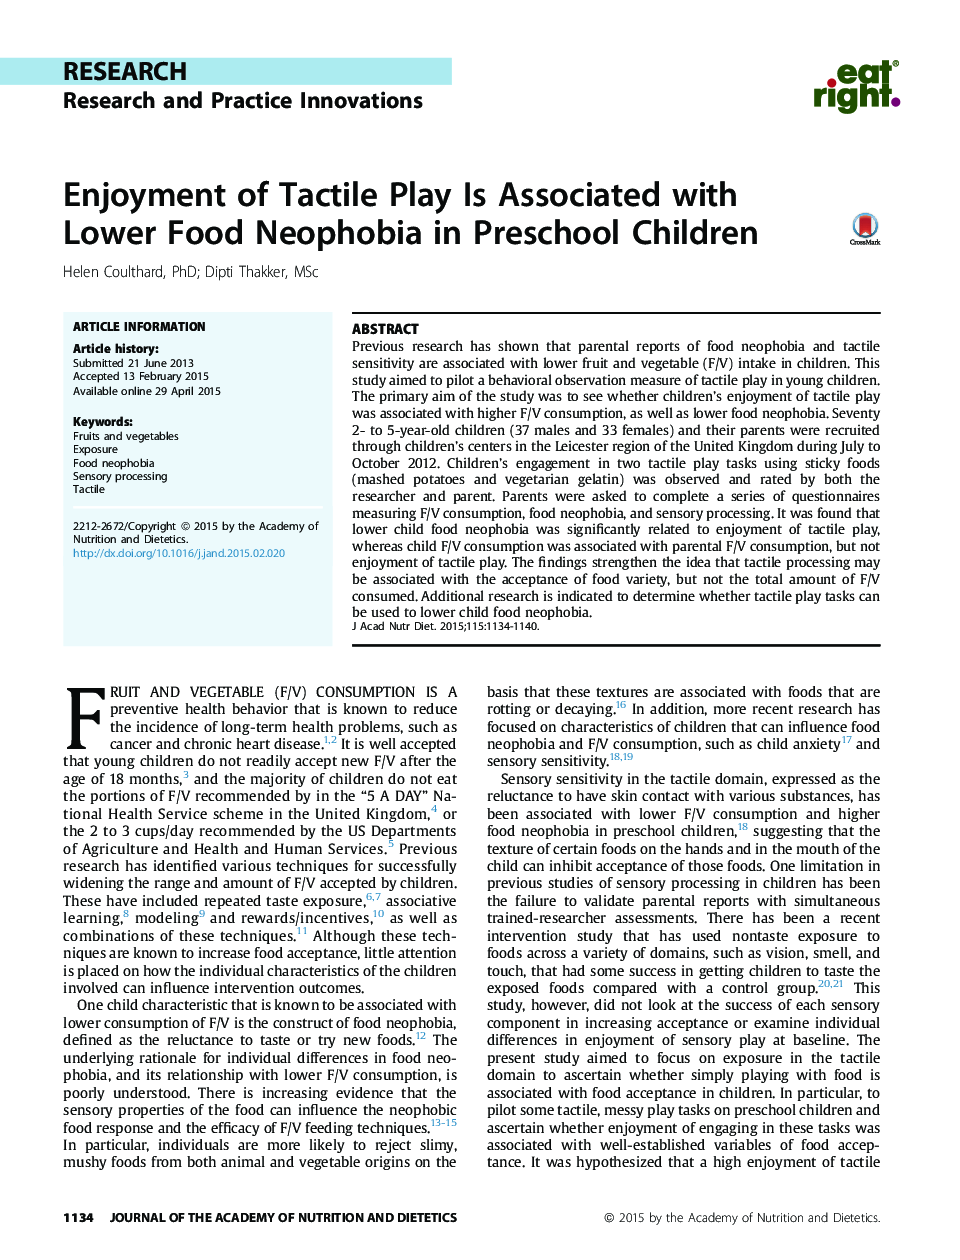 Enjoyment of Tactile Play Is Associated with Lower Food Neophobia in Preschool Children 